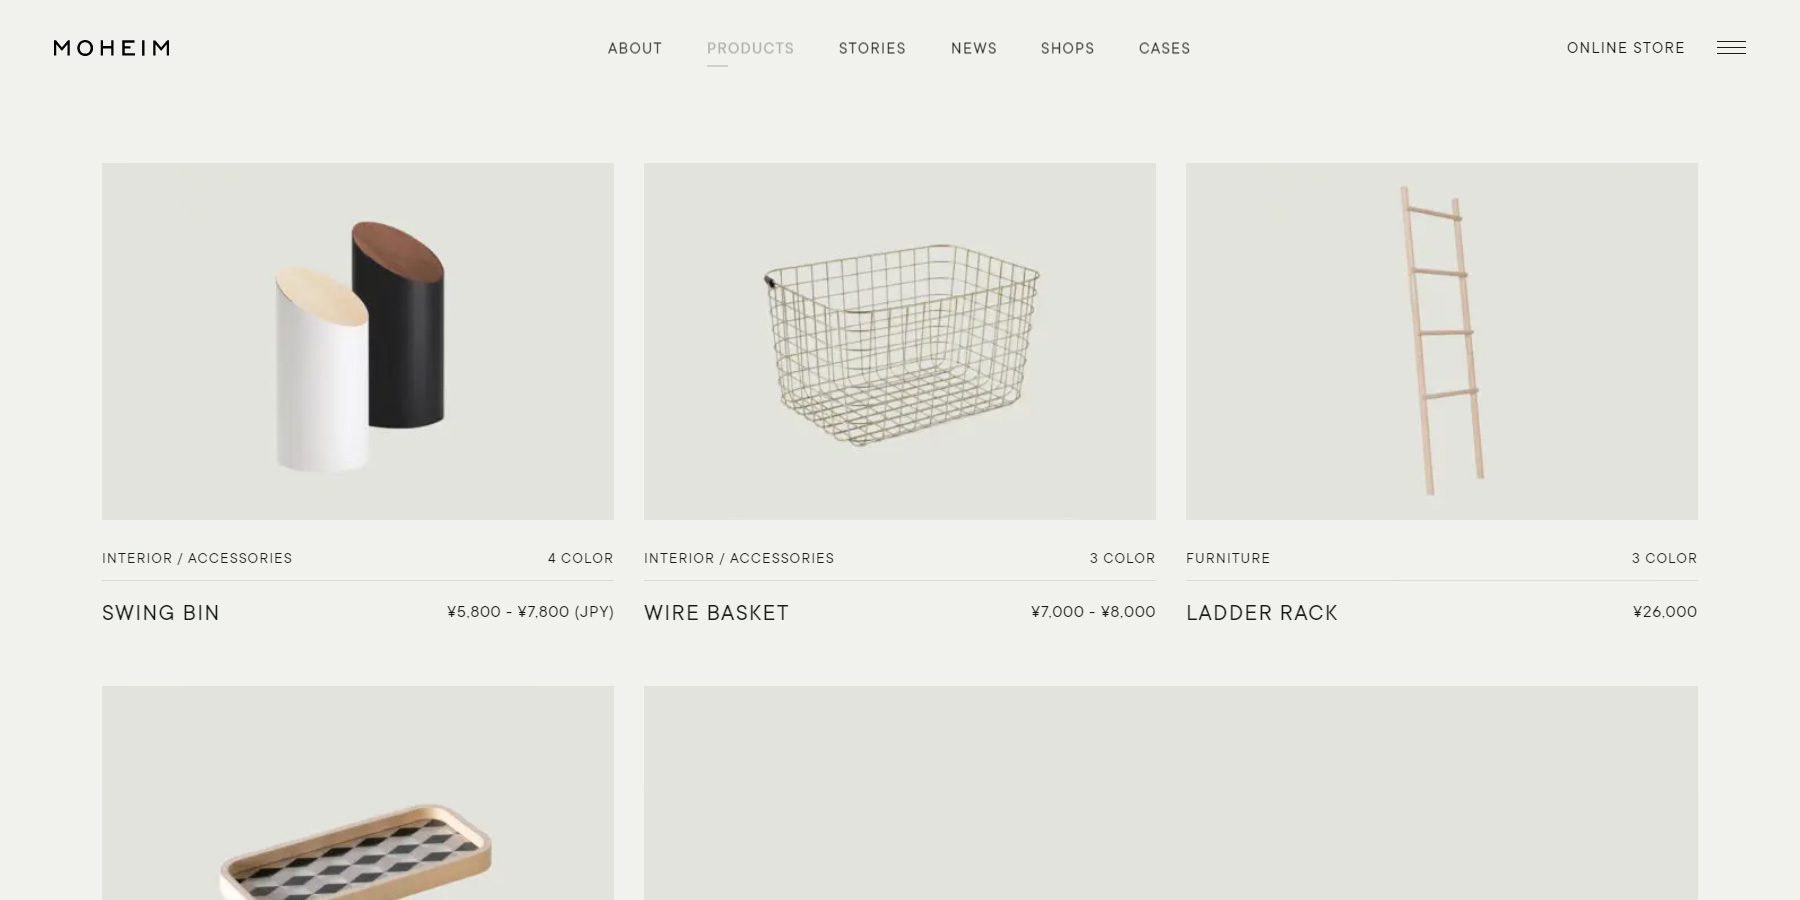 MOHEIM - Website of the Day